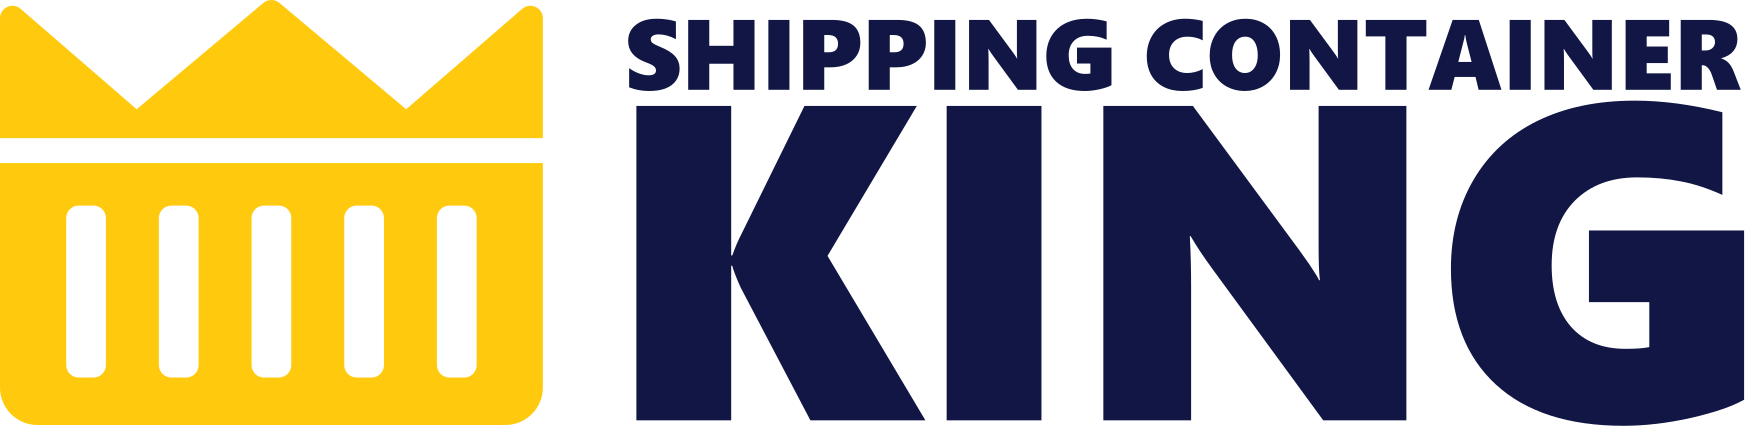 Shipping Container King Logo